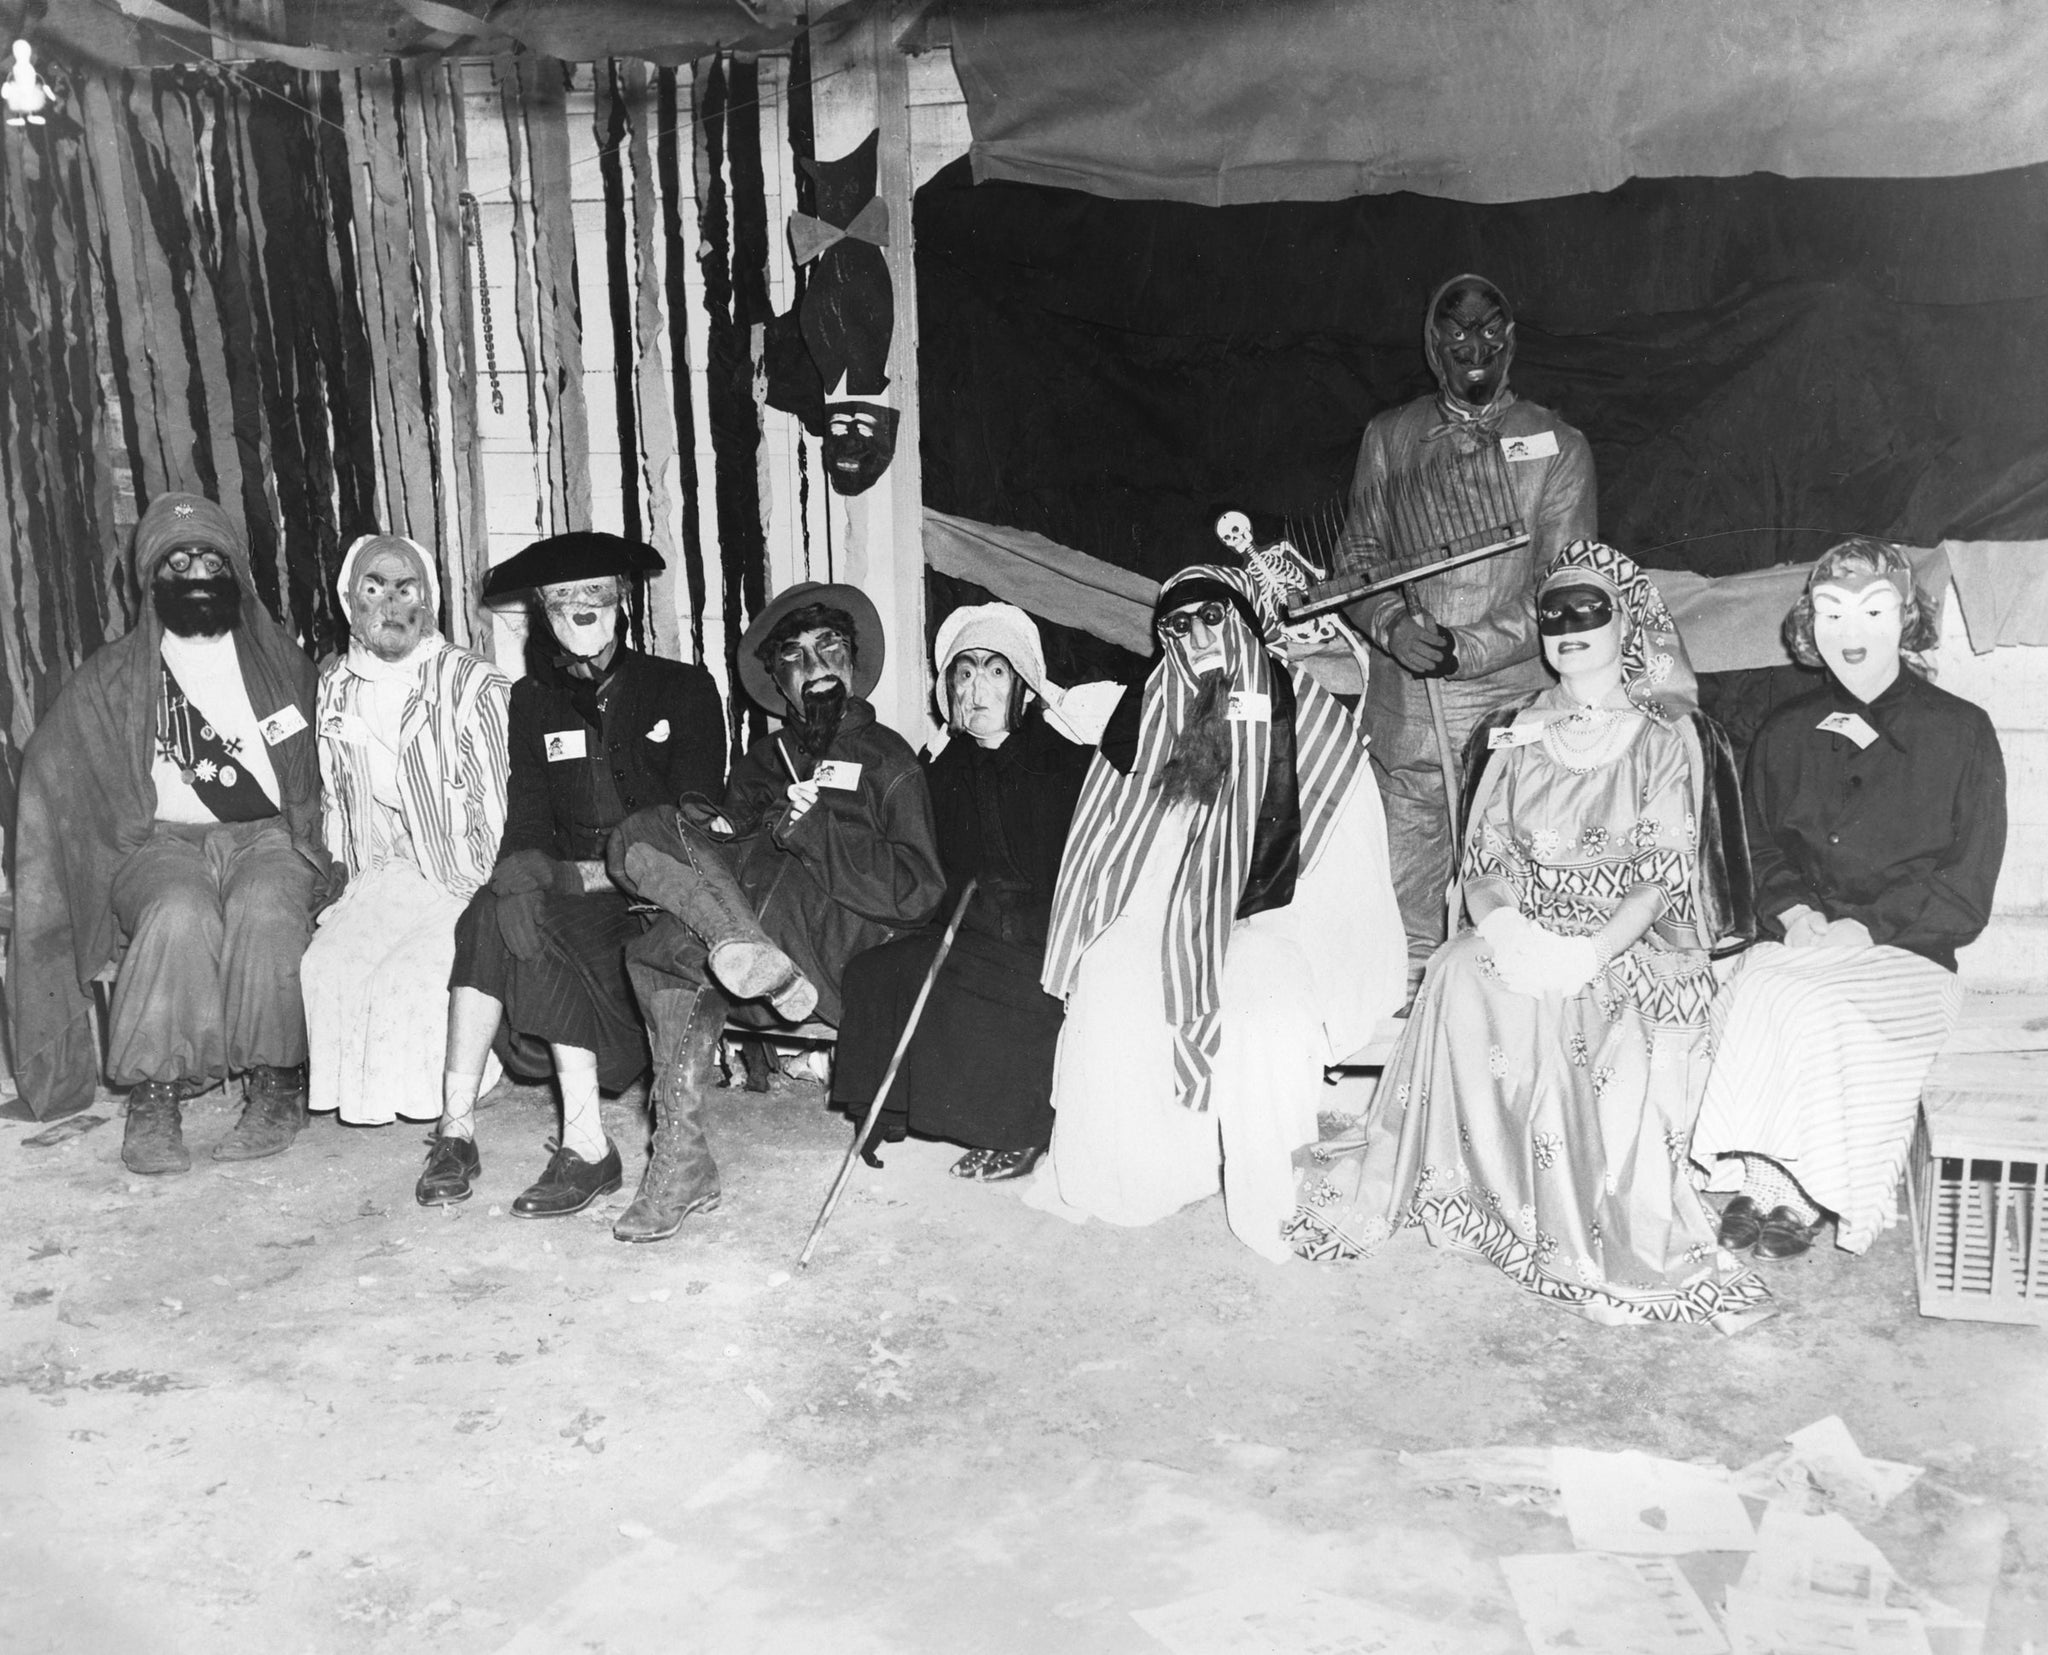 A Halloween party at the home of Clay and Wilma Auman in Asheboro, 1957. -- Courtesy of Elizabeth Perry Nault